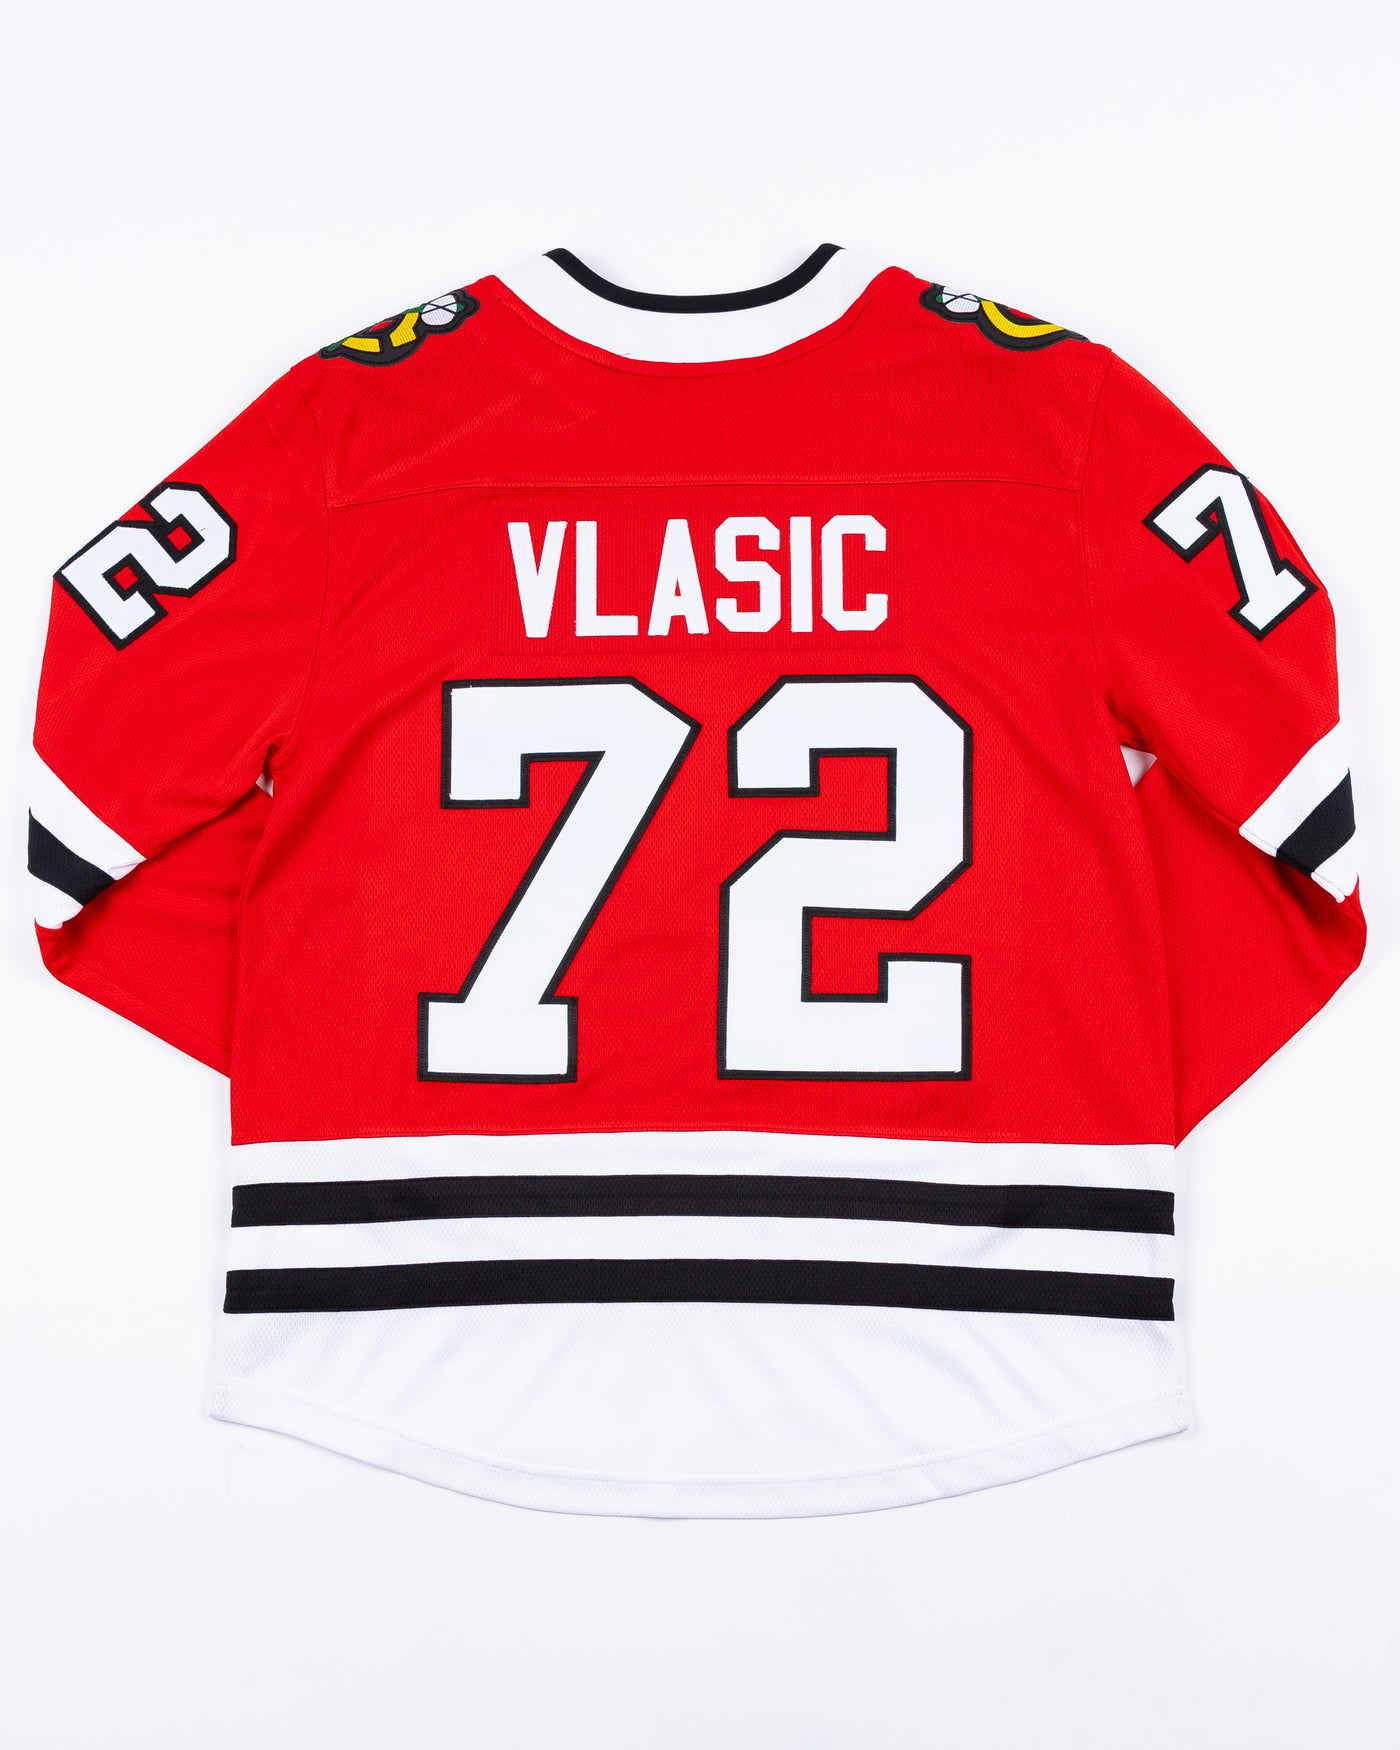 red Fanatics hockey jersey with stitched Alex Vlasic name and number - back lay flat